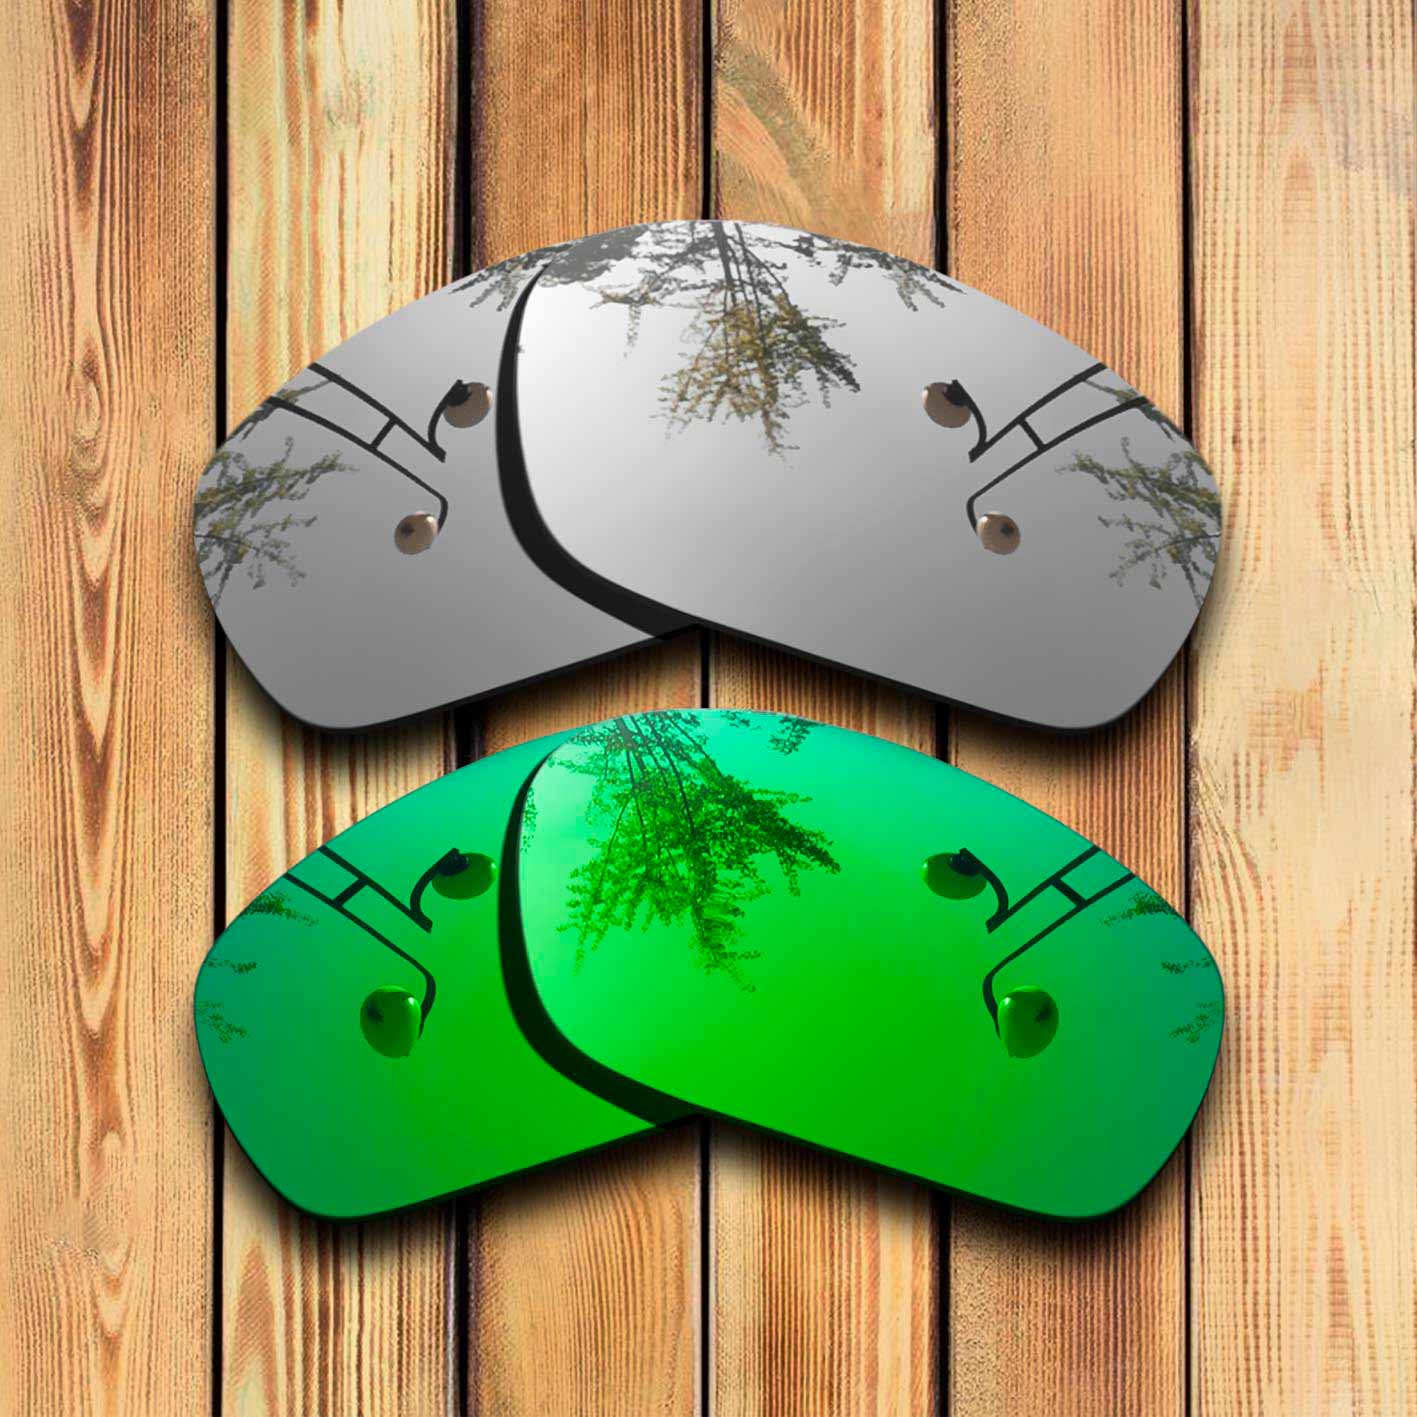 100% Precisely Cut Polarized Replacement Lenses for Jawbone Sunglasses Chrome &amp; Green Combine Options